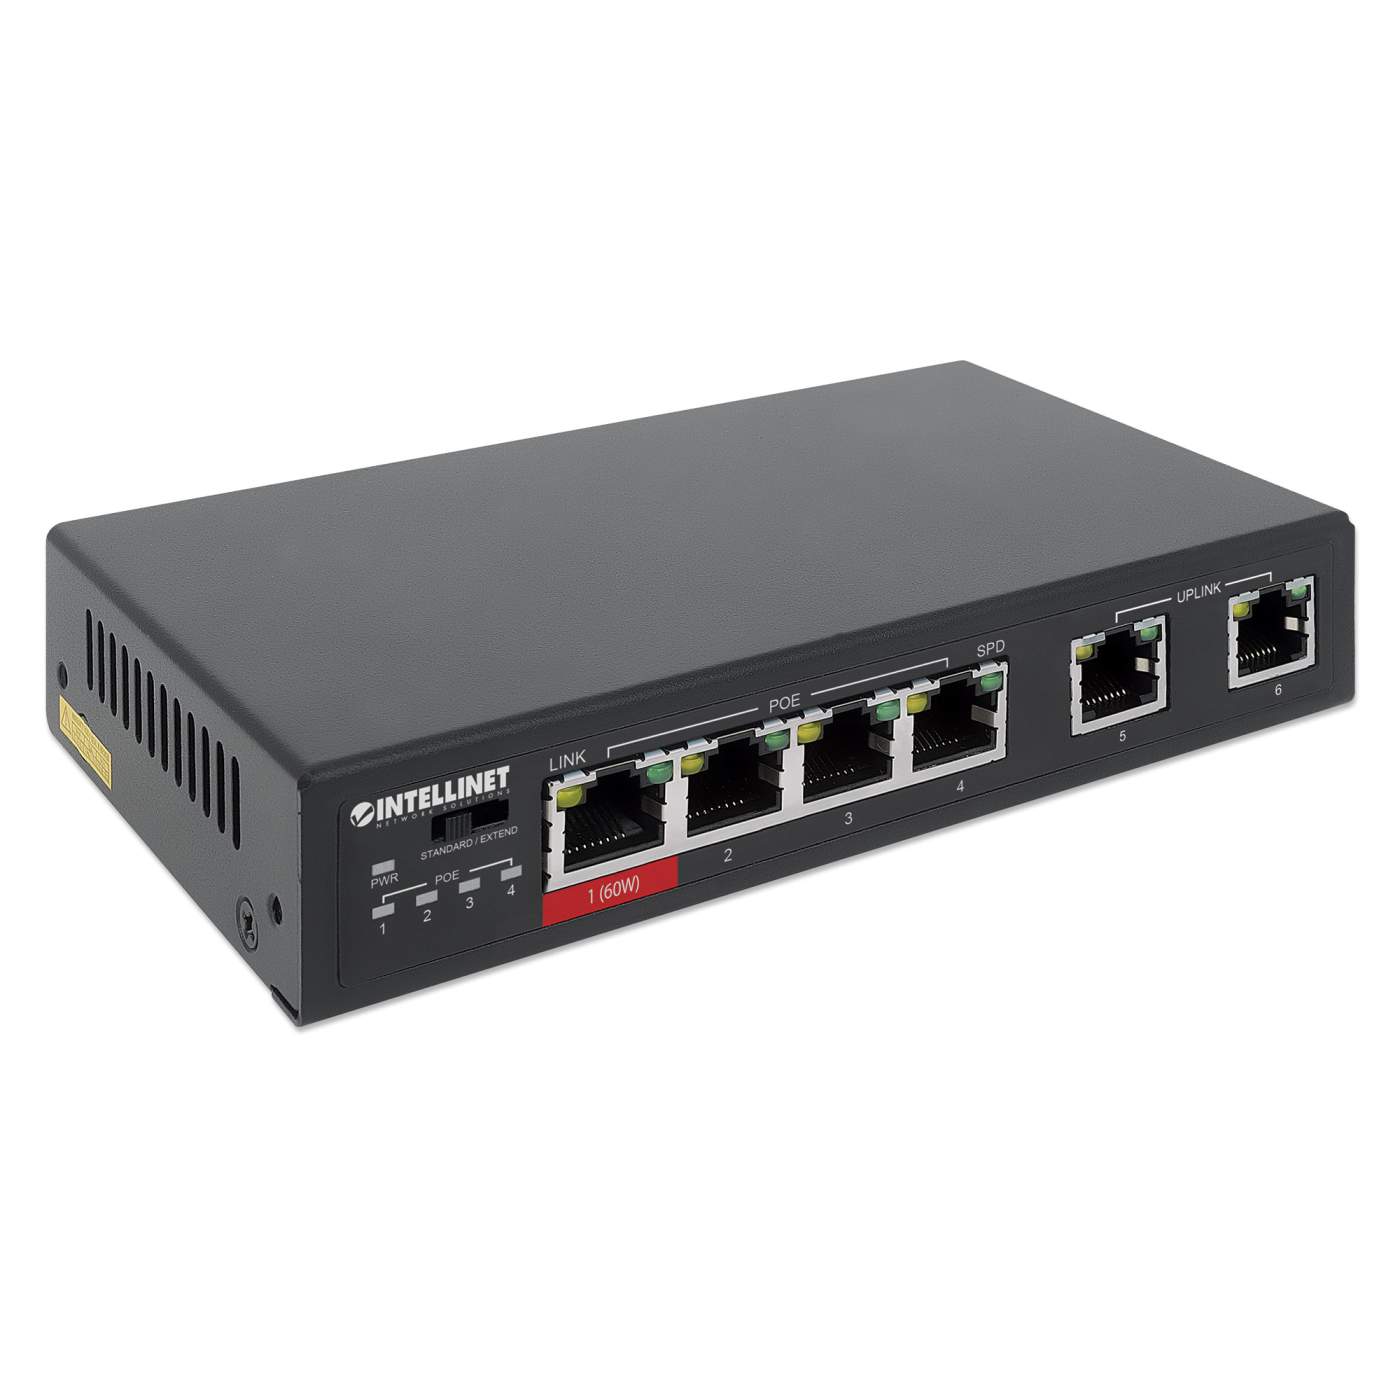 8 Port PoE Switch With 7 PoE Ports and 1 Uplink